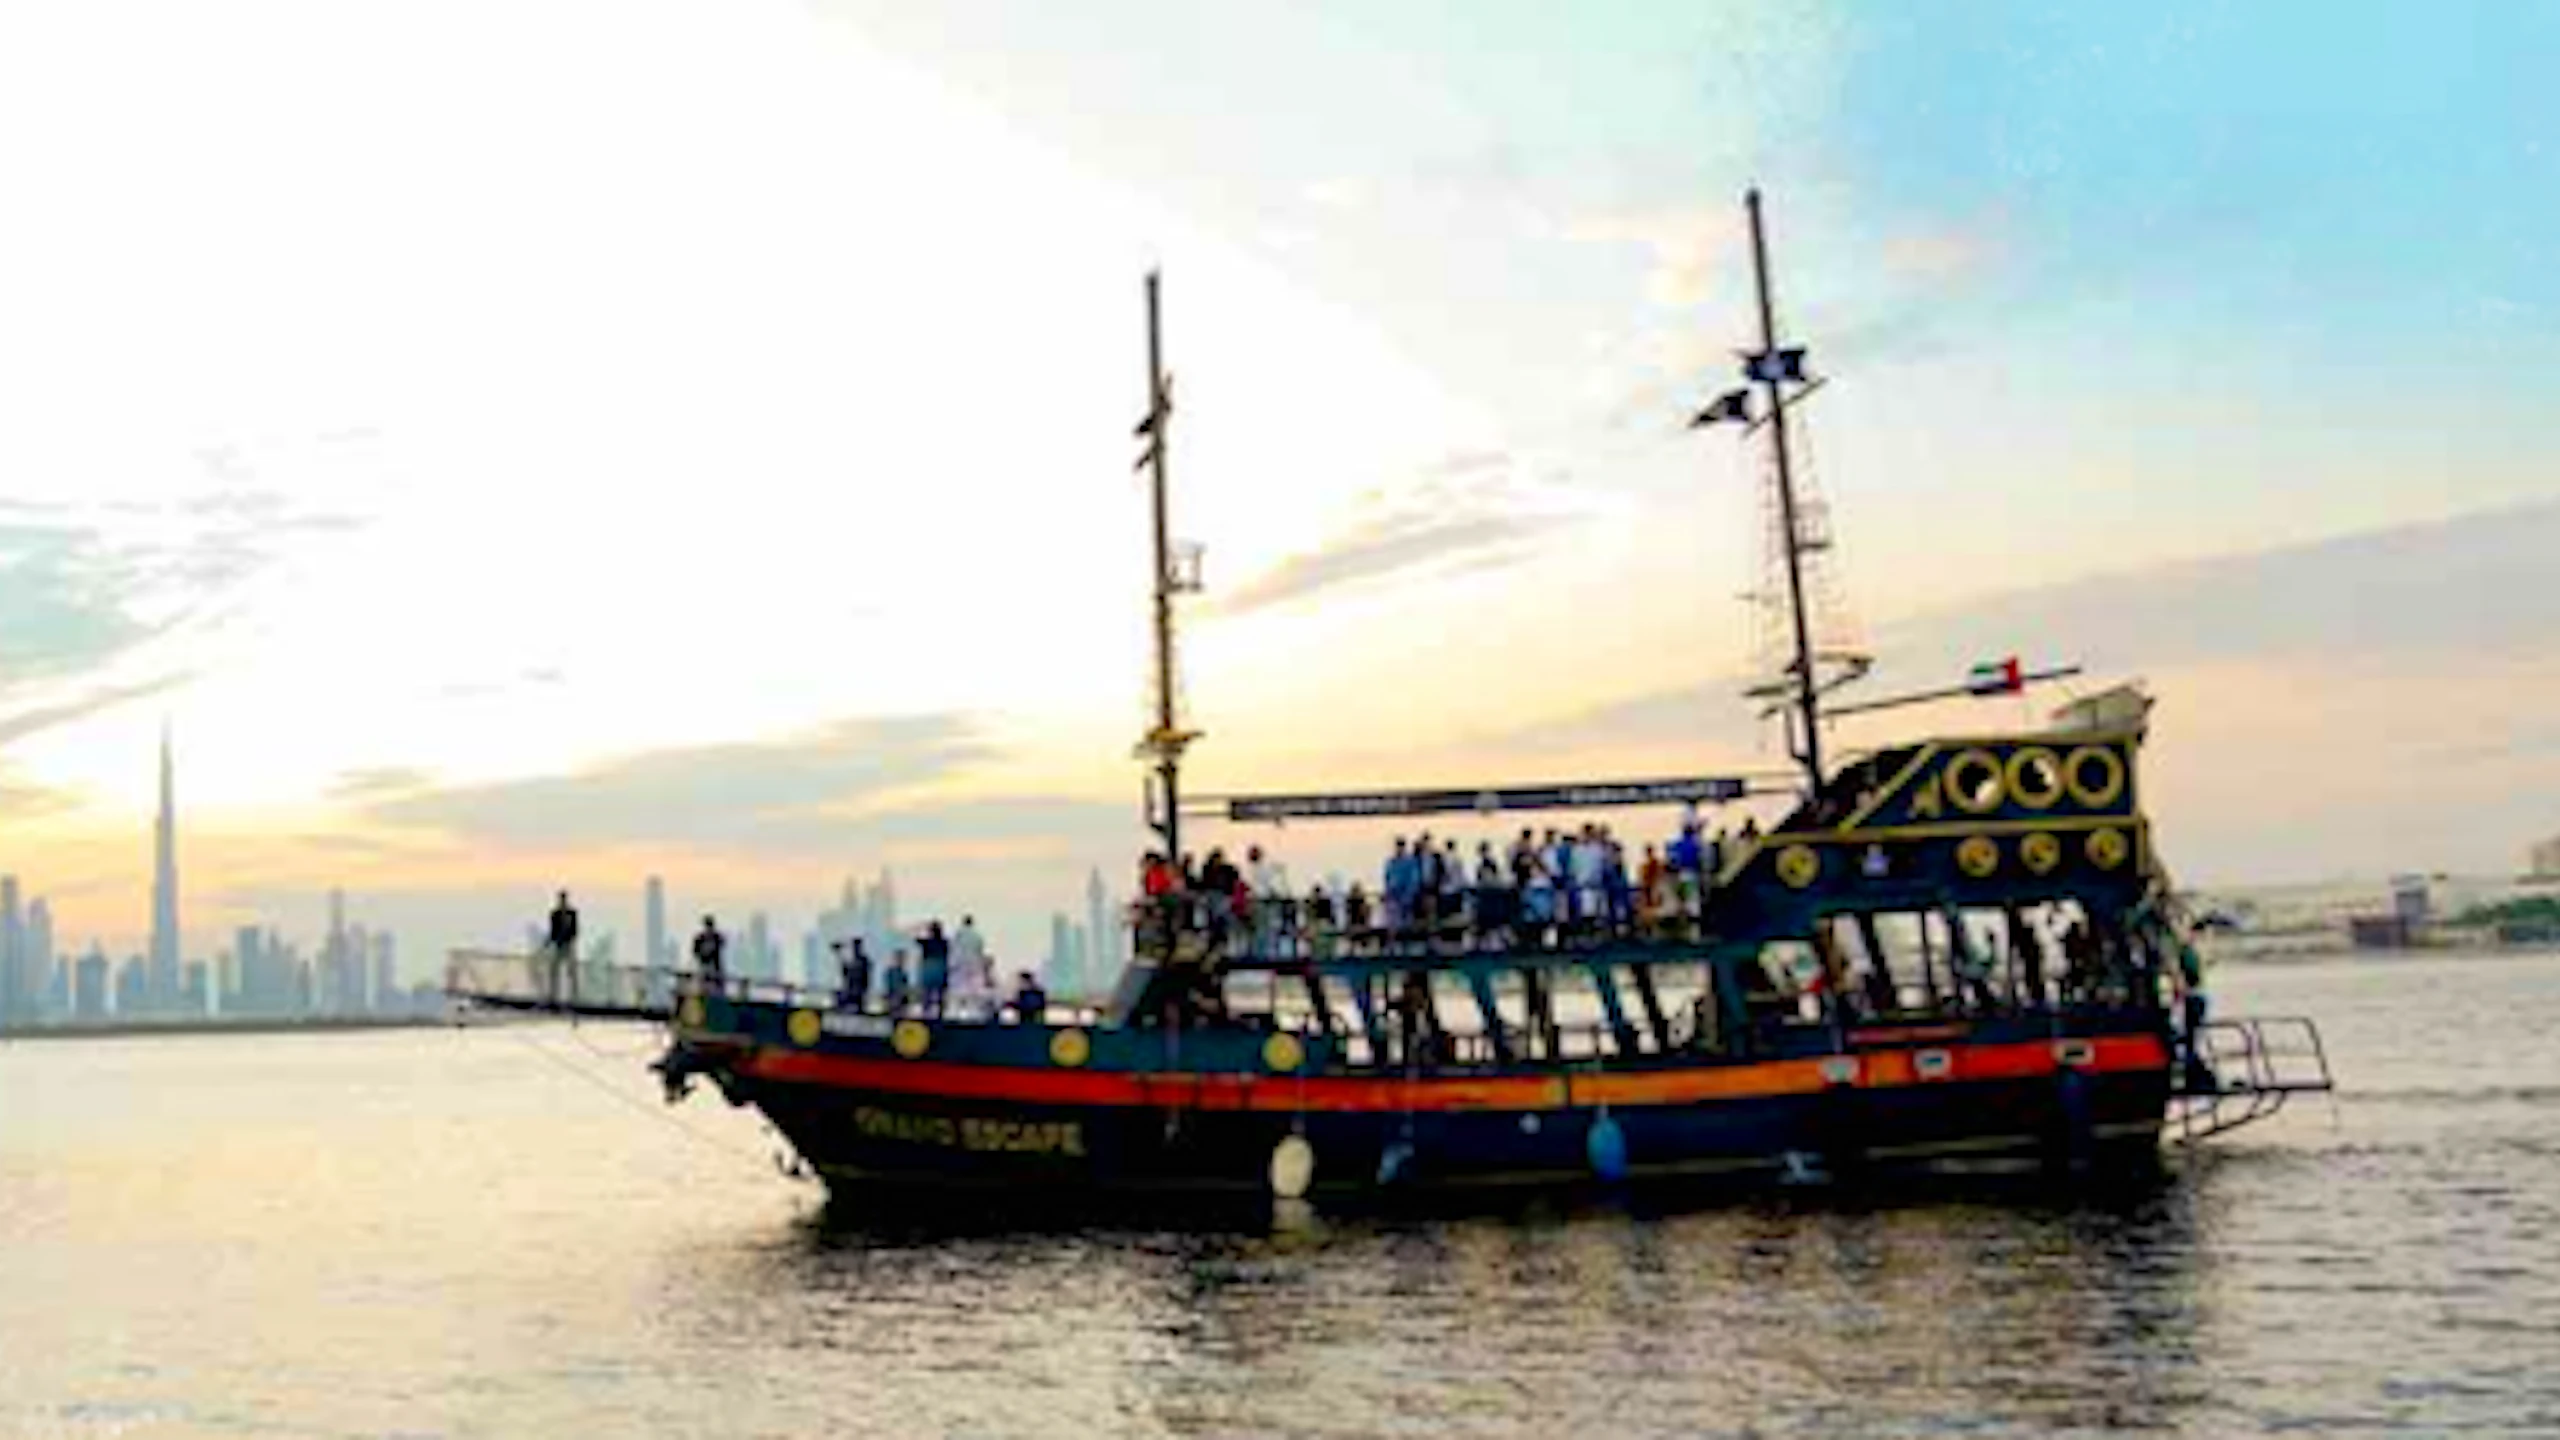 Black Pearl Themed Sightseeing Cruise Price